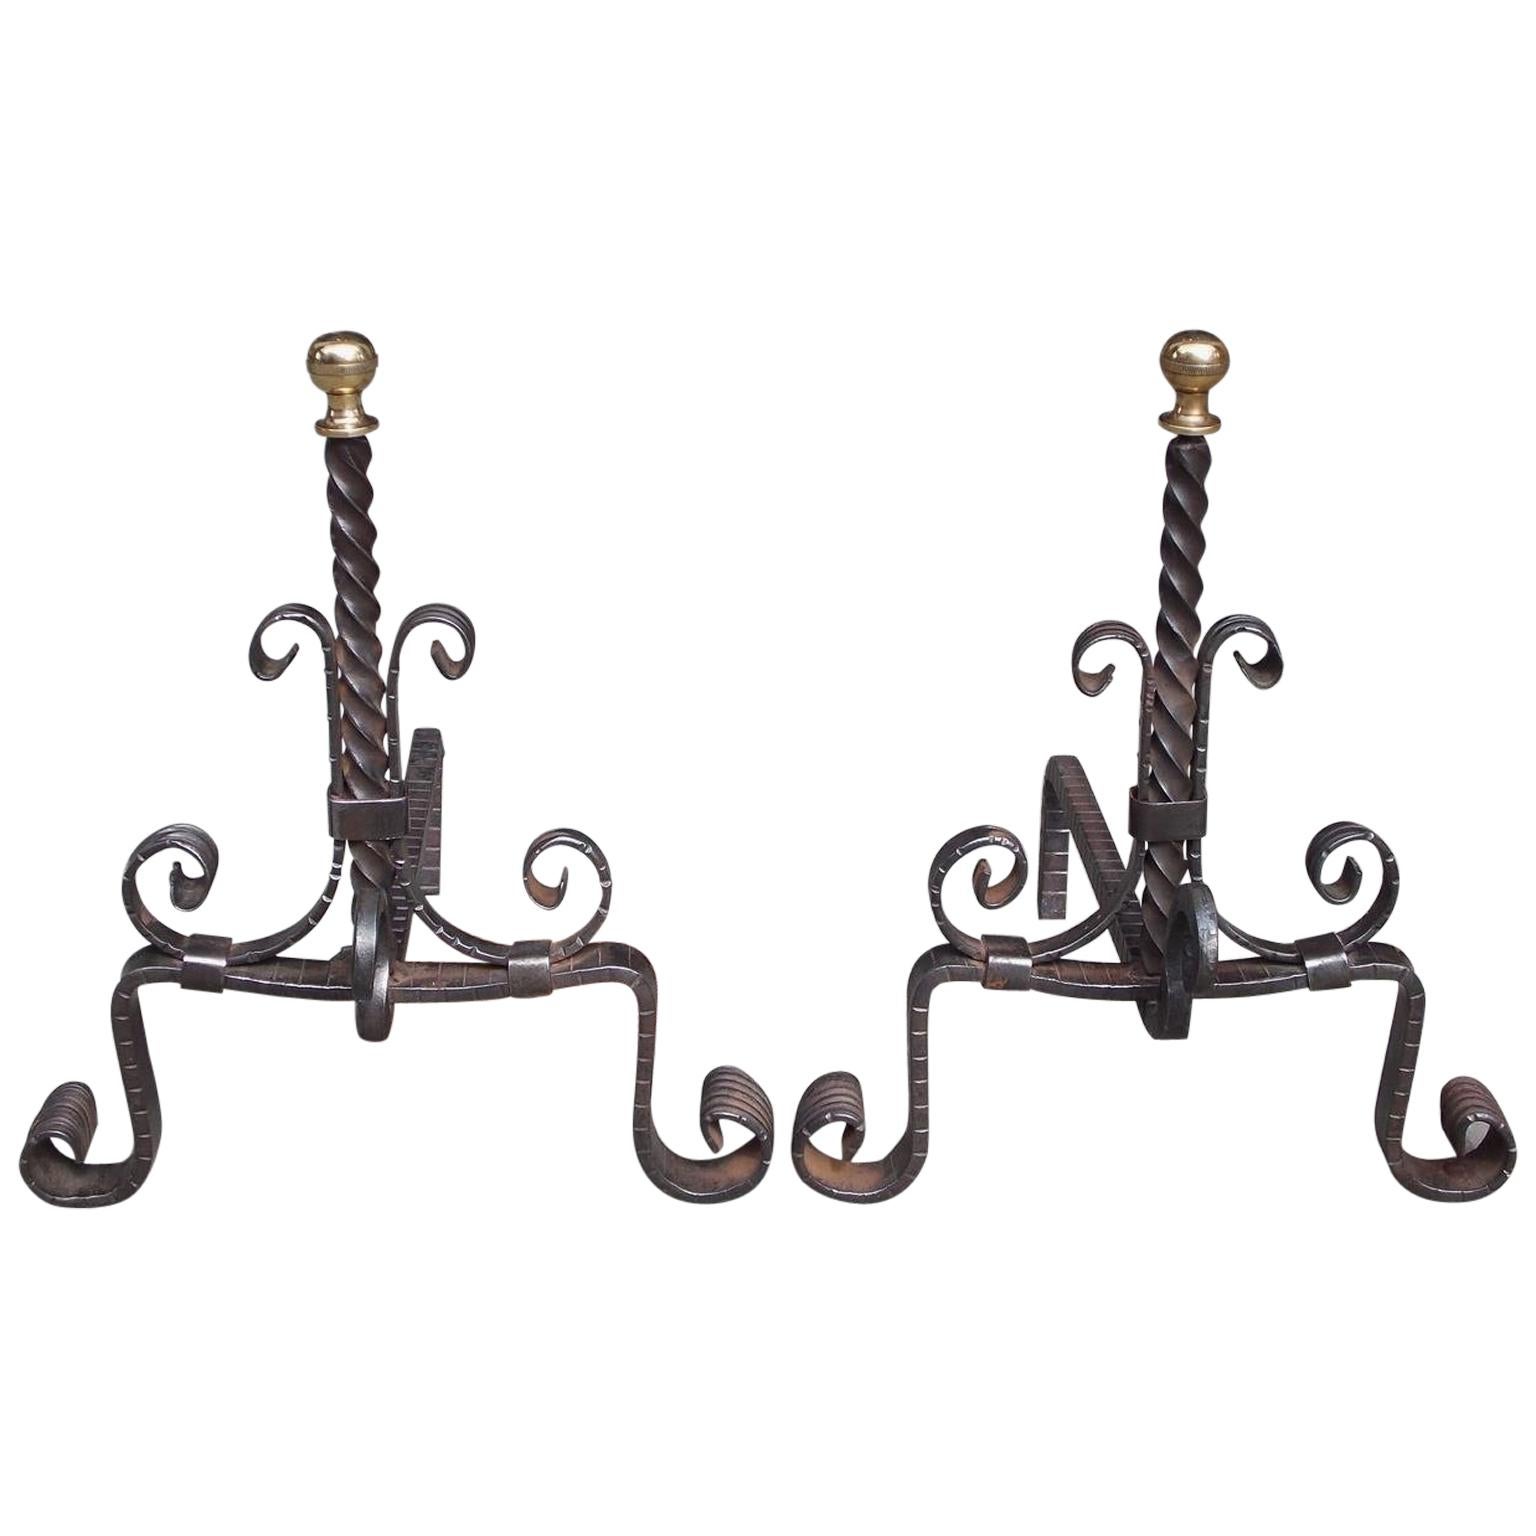 Pair of American Wrought Iron and Brass Ball Top Diminutive Andirons , C. 1840 